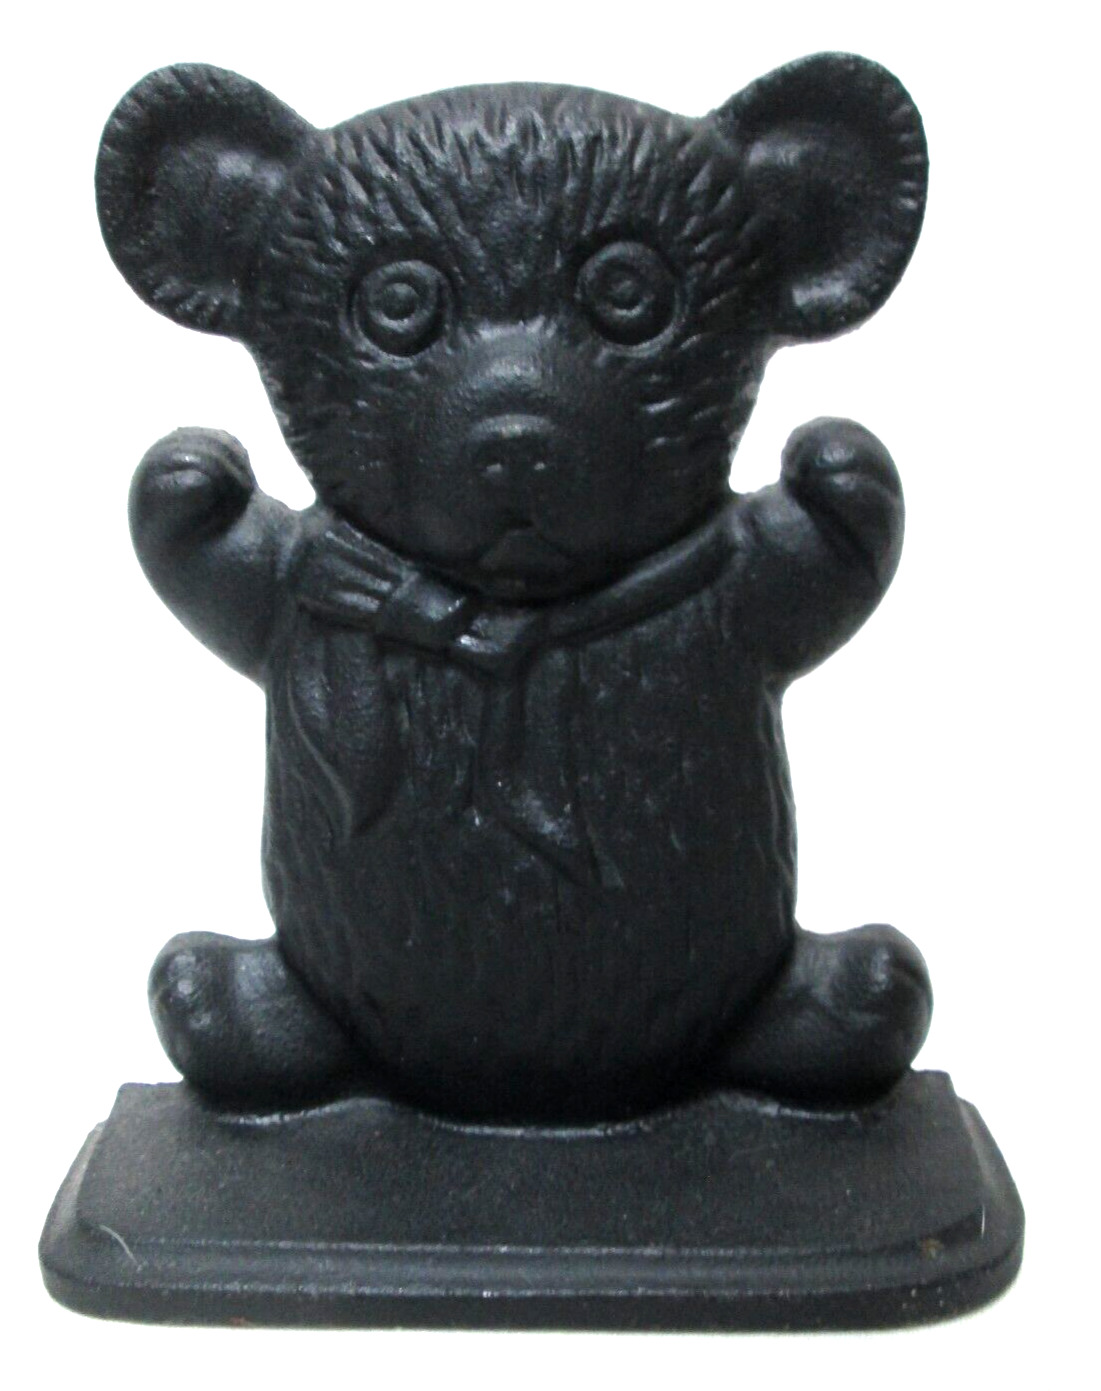 Cast Vintage Iron Teddy Bear Bookend Doorstop black 6.5 inches tall 2.7 pounds